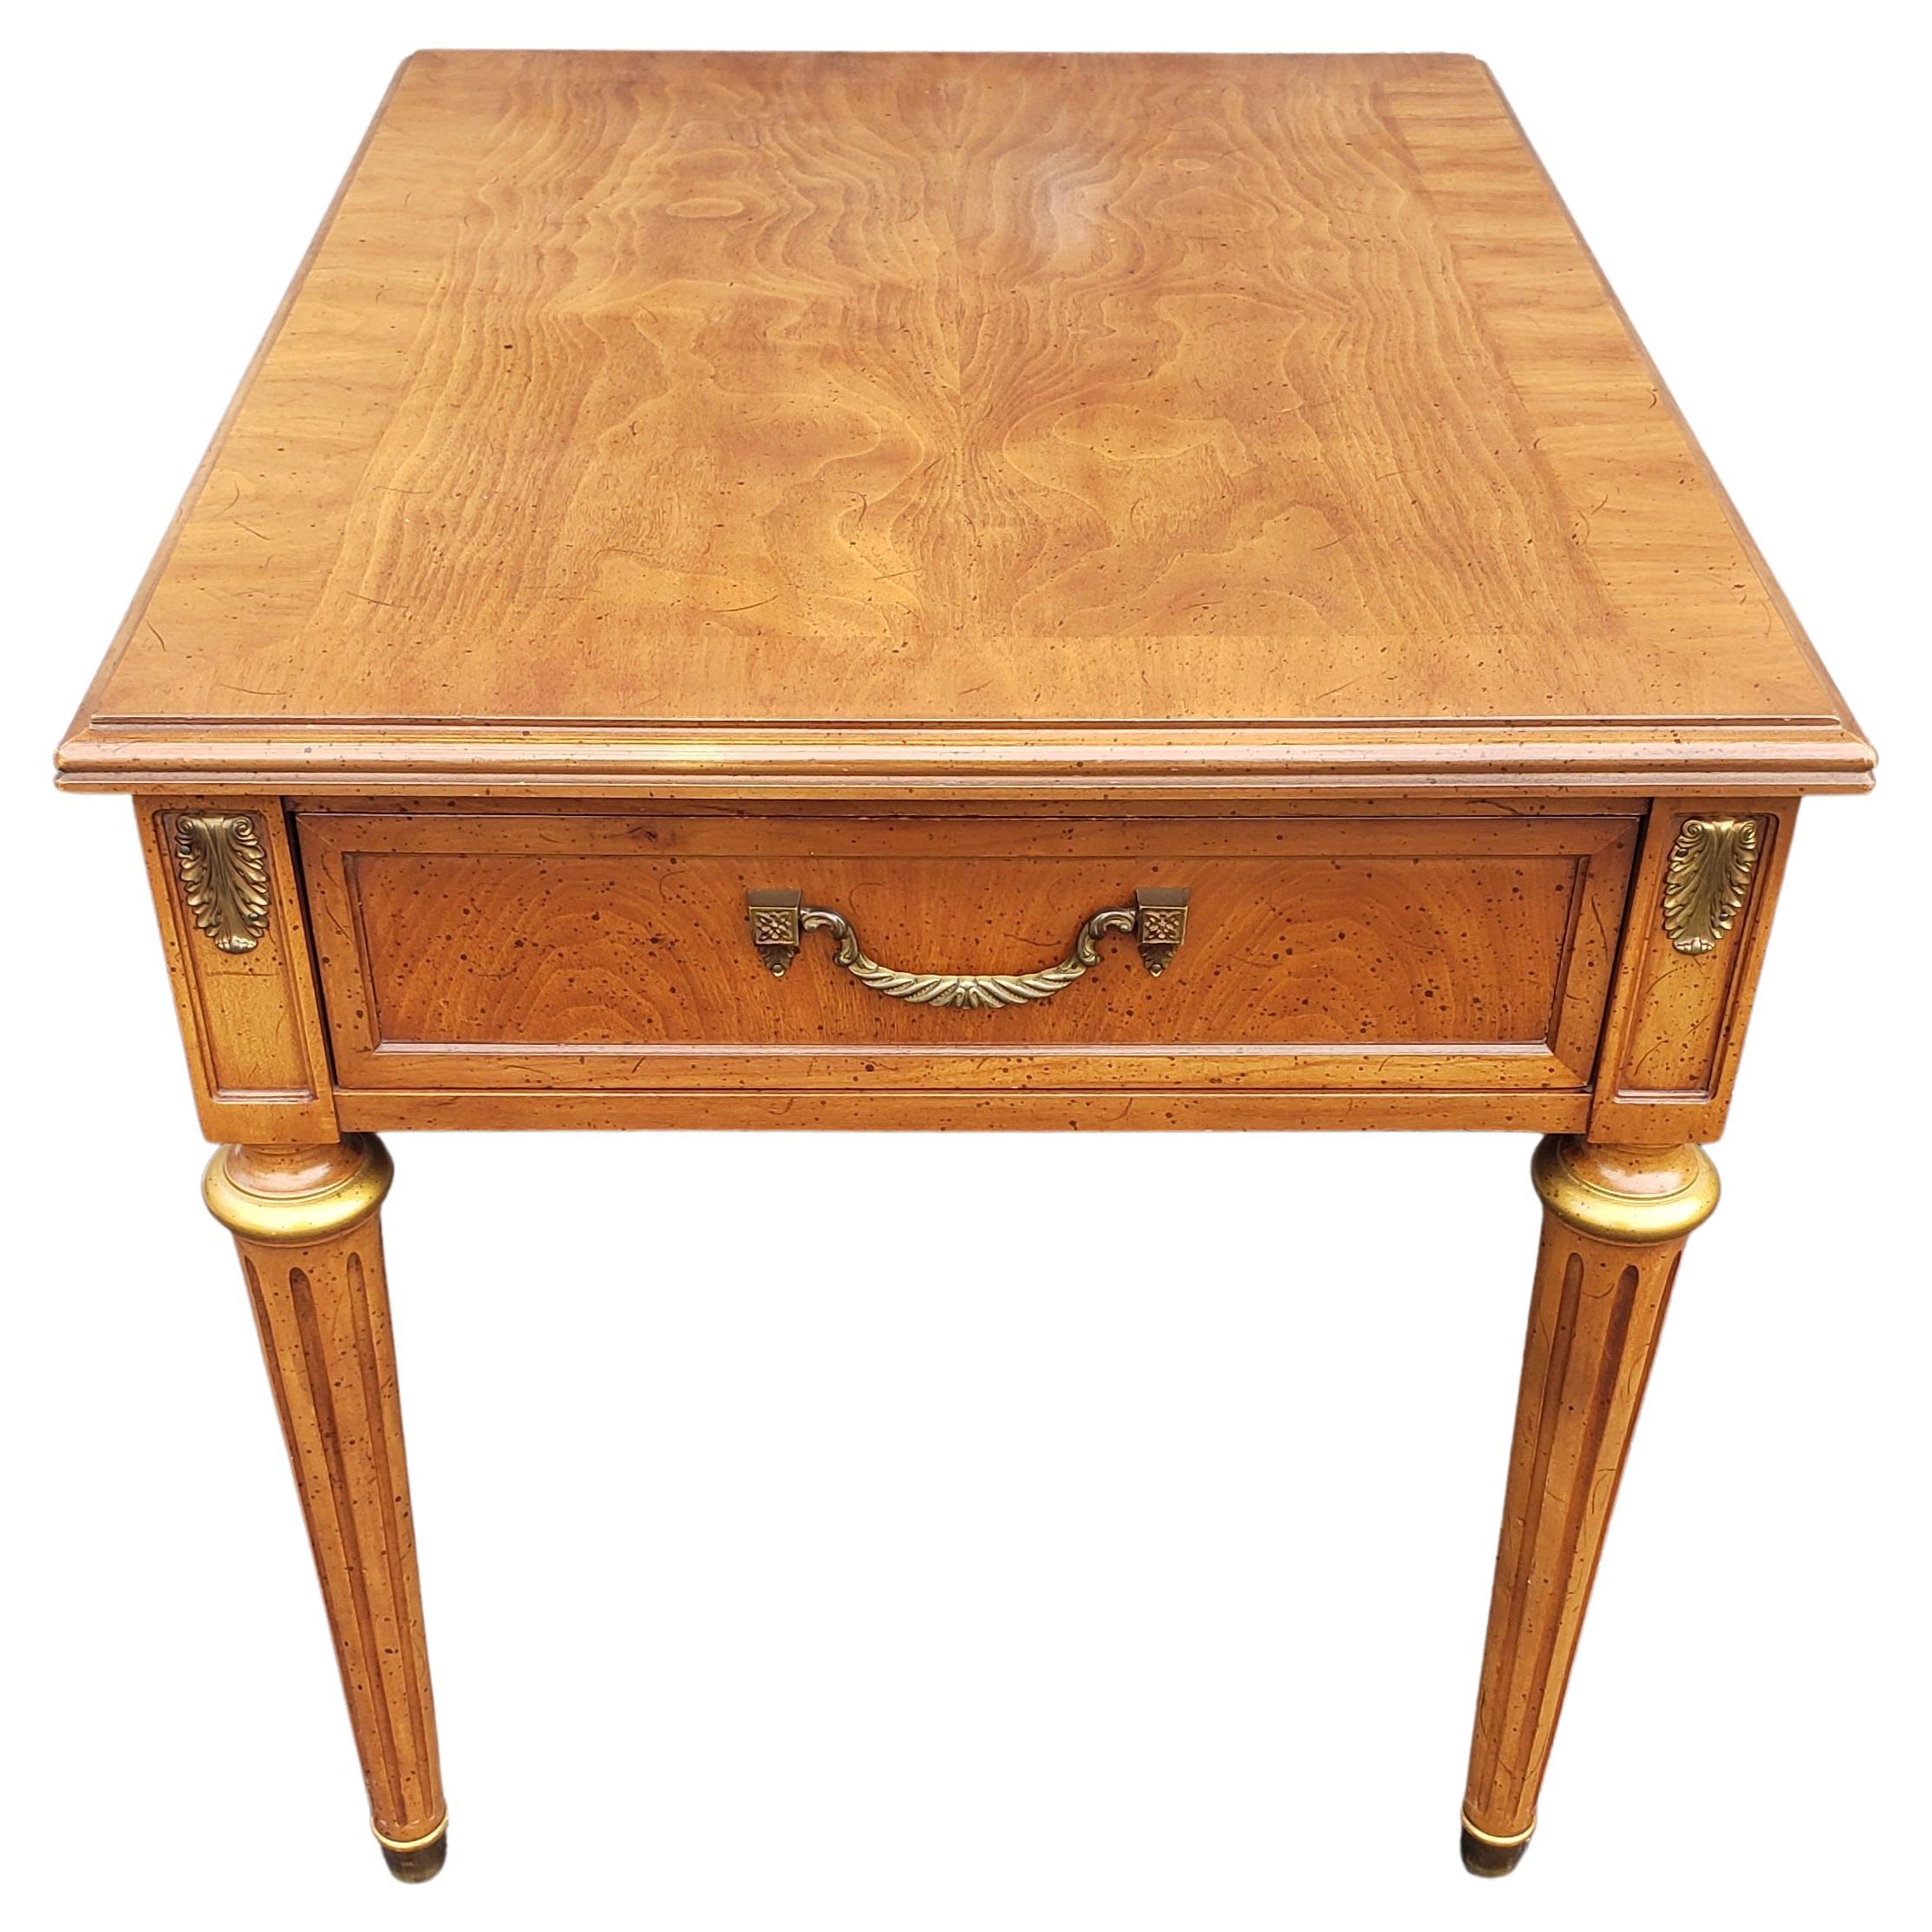 Offered to you is this Henredon Fine Furniture burl walnut banded top side table. One dovetailed drawer with drop down pull. Brass medallions, cannelured legs, brass capped legs and gold accents. 
Absolutely beautiful and in very good condition.